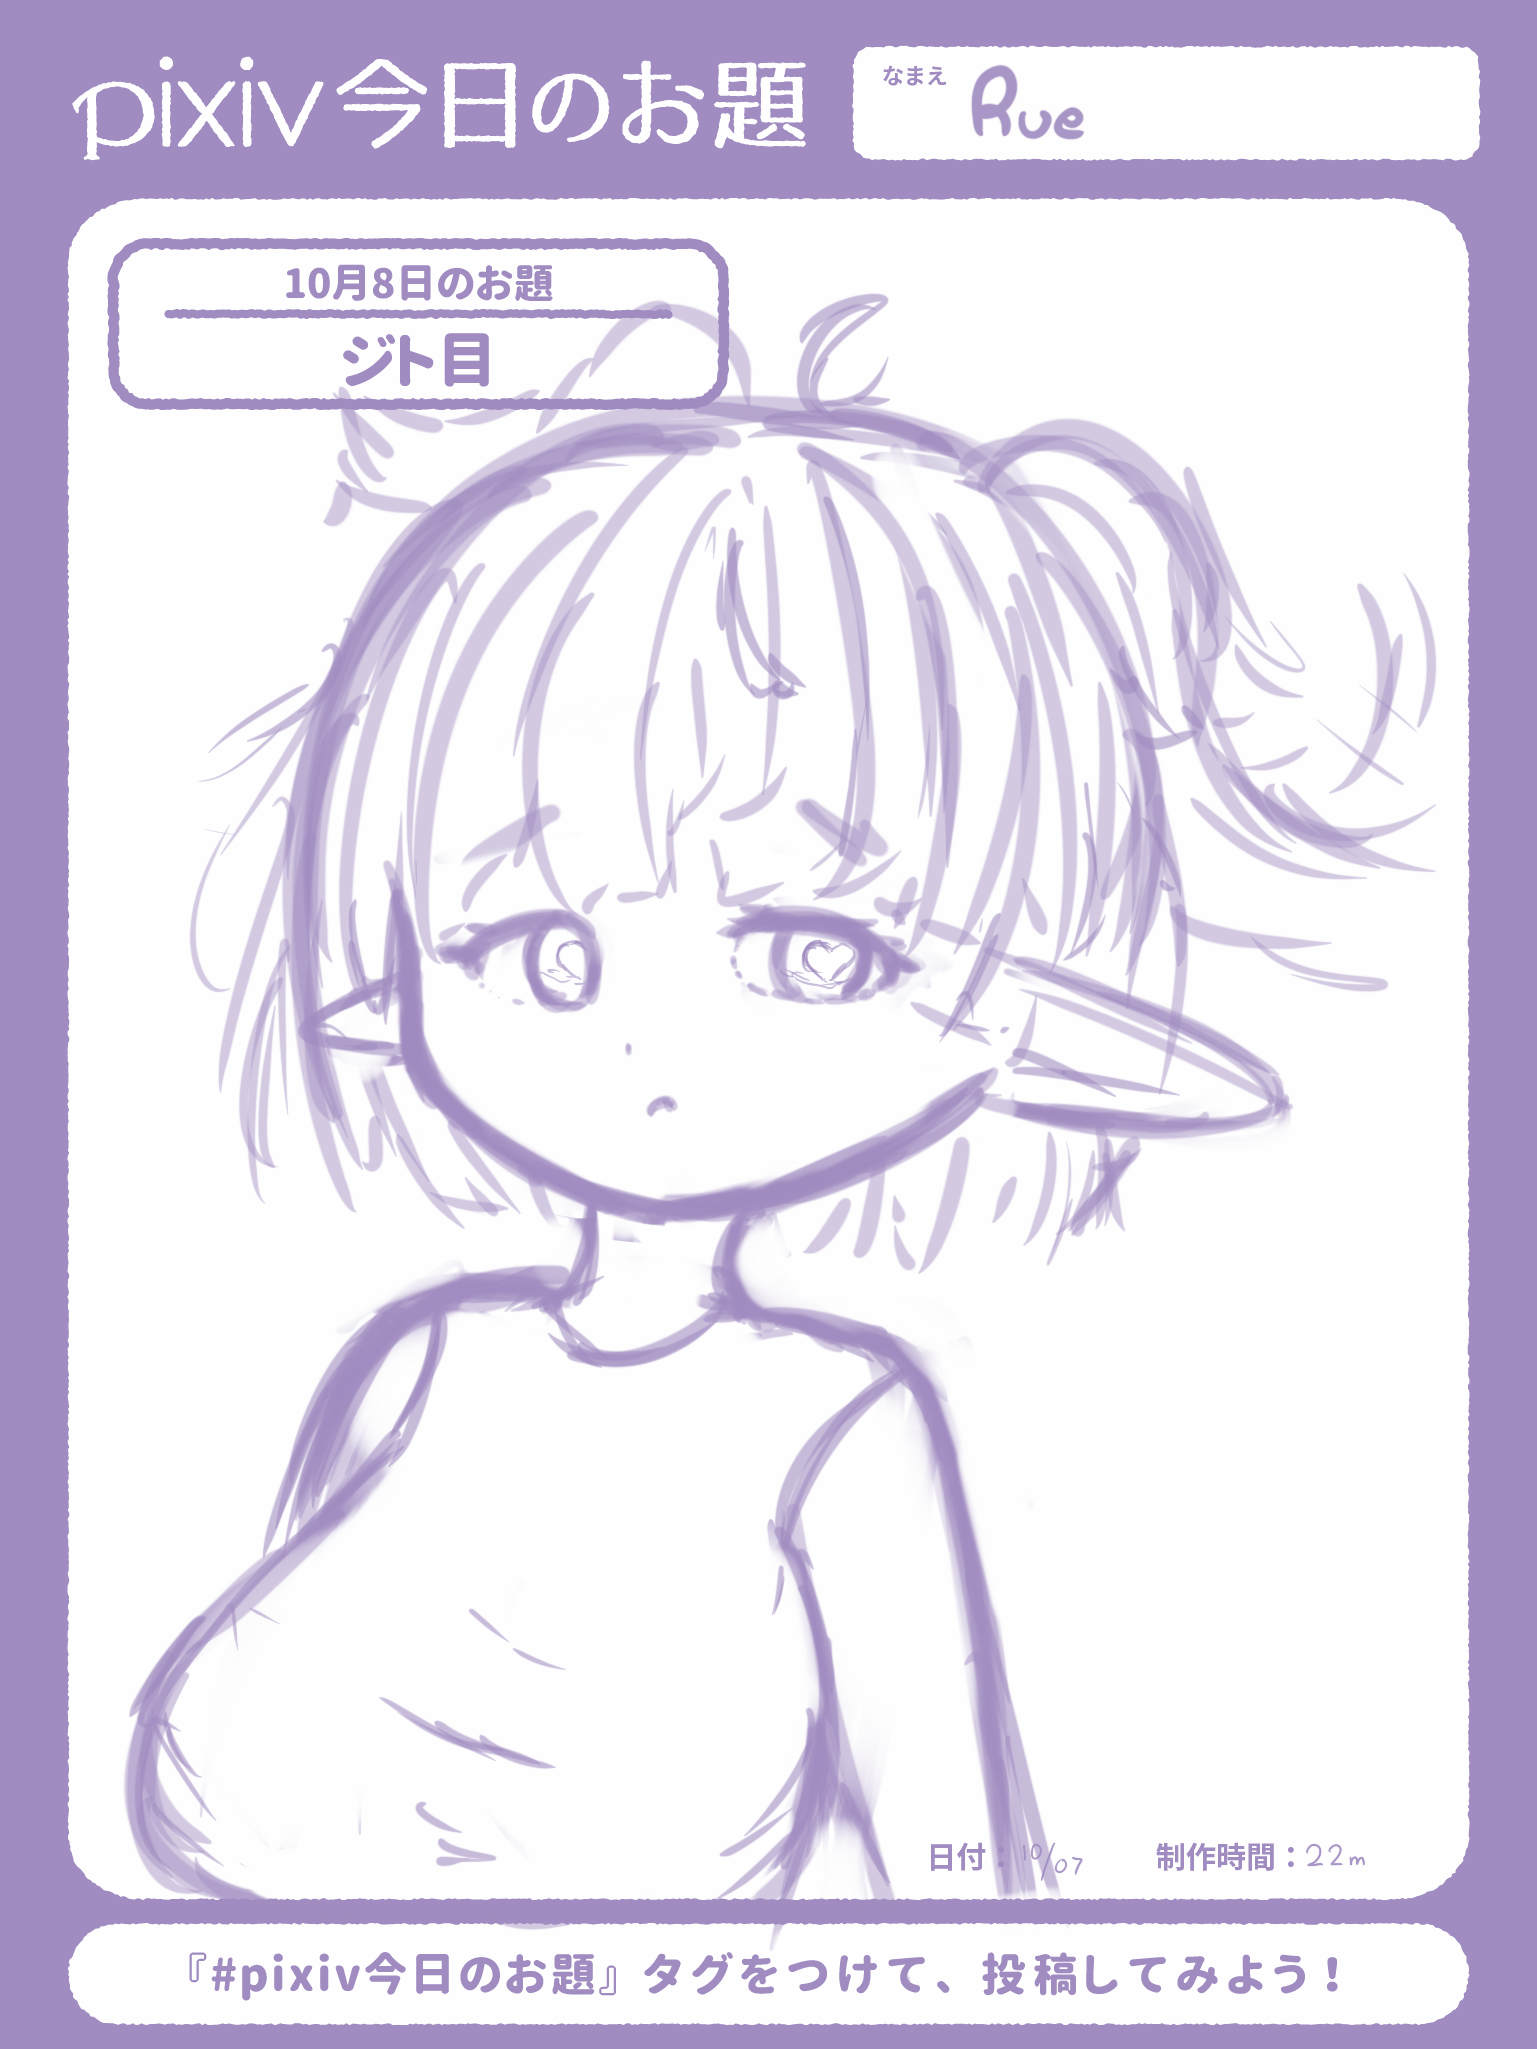 My sketch for today’s pixiv theme of #ジト目. It’s me doing a kinda sideways stare at the viewer! The sketch itself is a bit lazy and unrefined because I didn’t really feel like sketching today.